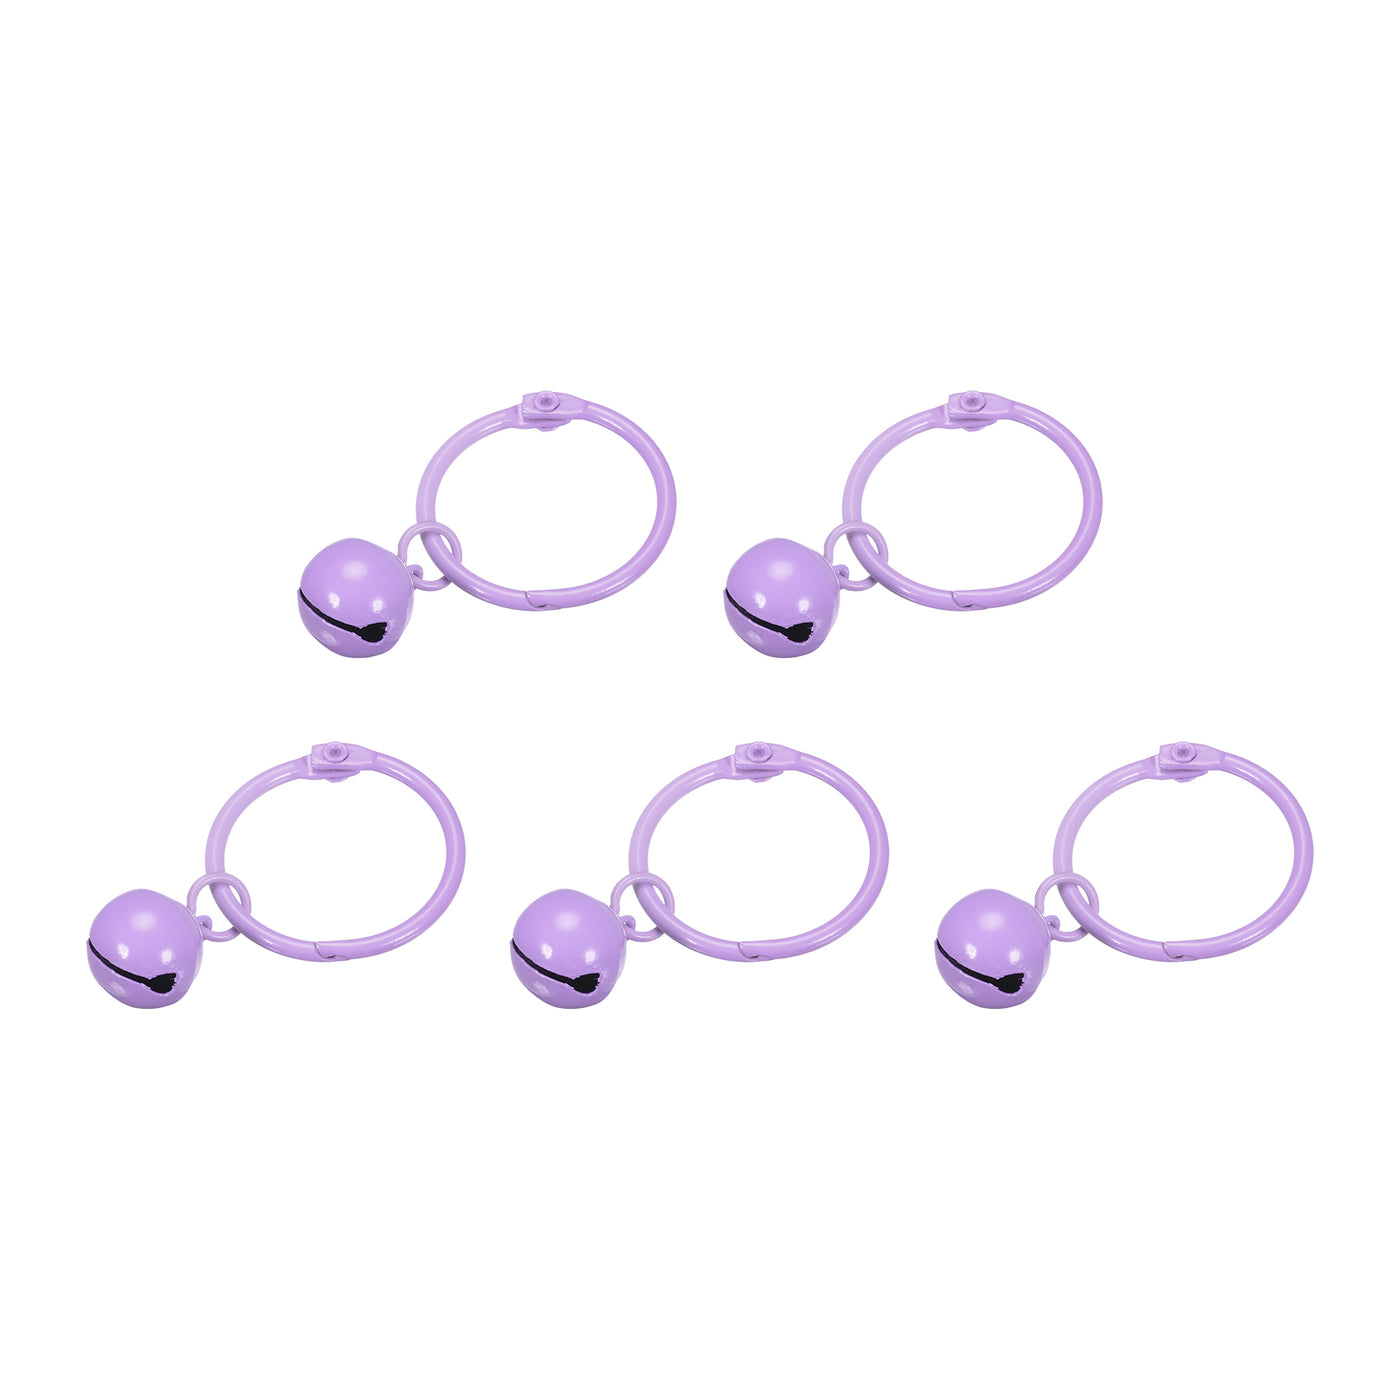 uxcell Uxcell 5Pcs Keyrings with Bells, Purple 30mm/0.51" Dia Jingle Bell for DIY Crafts